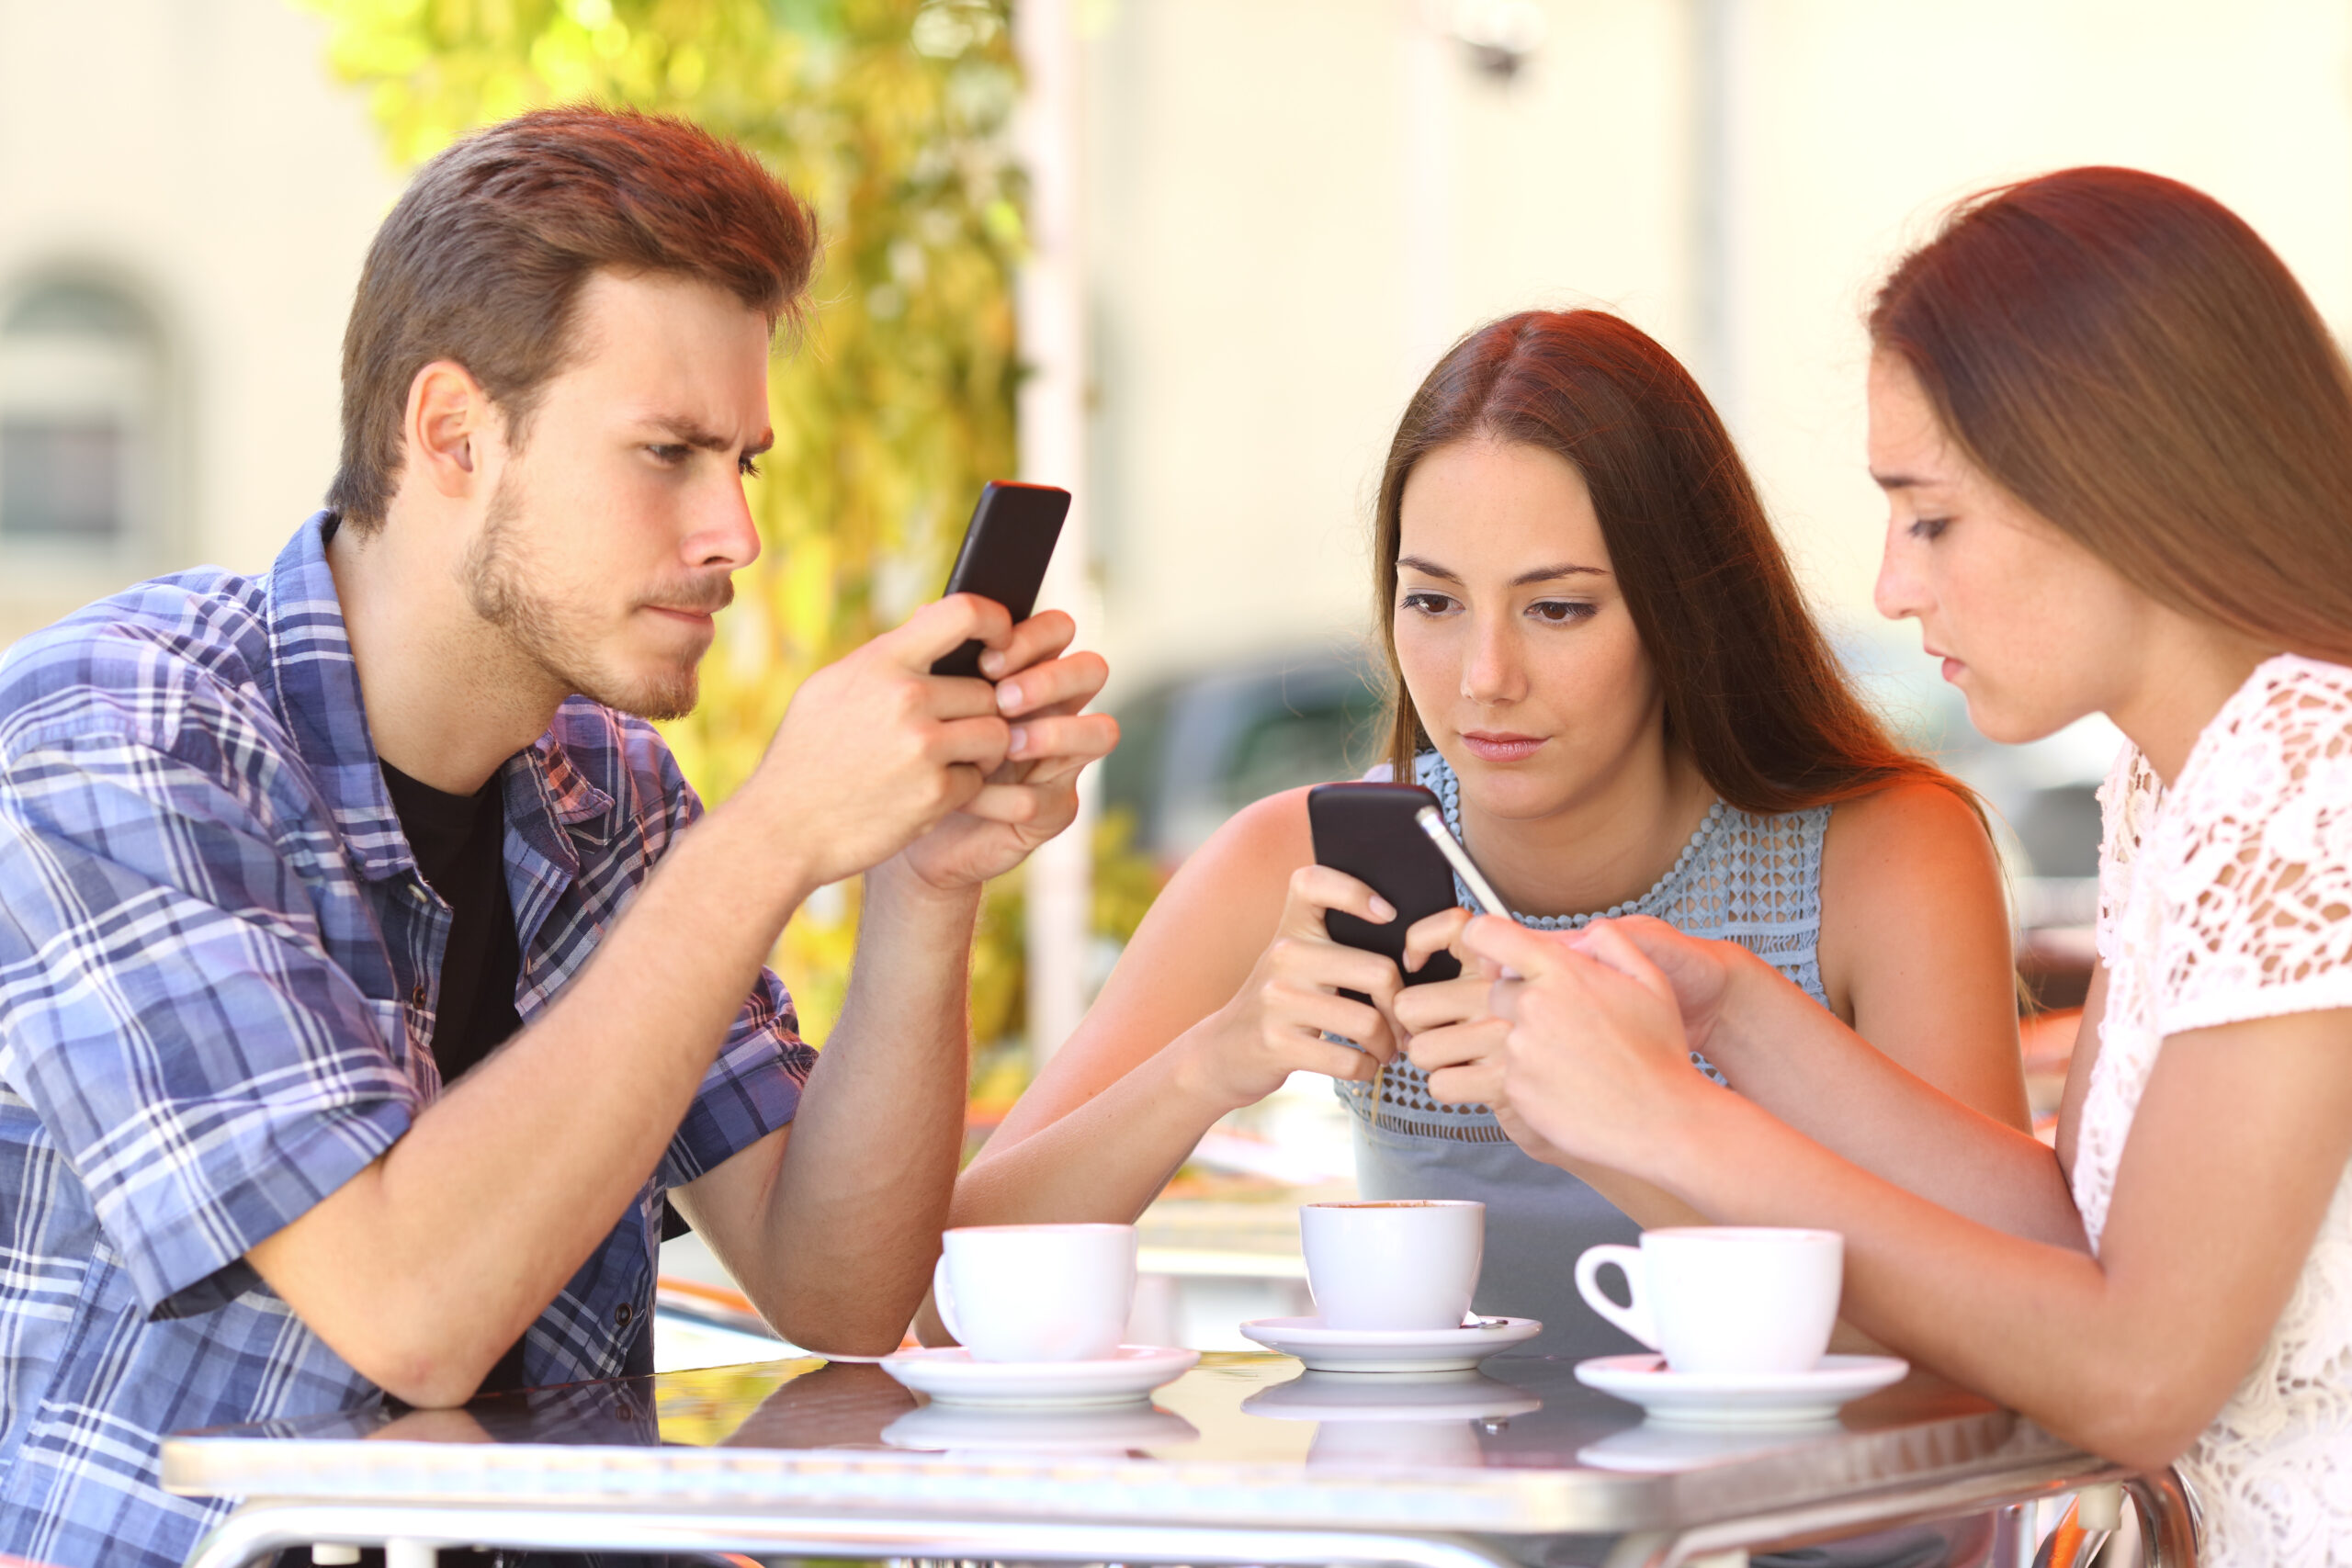 Group of three smart phone addicted friends in a coffee shop terrace everyone with one cellphone